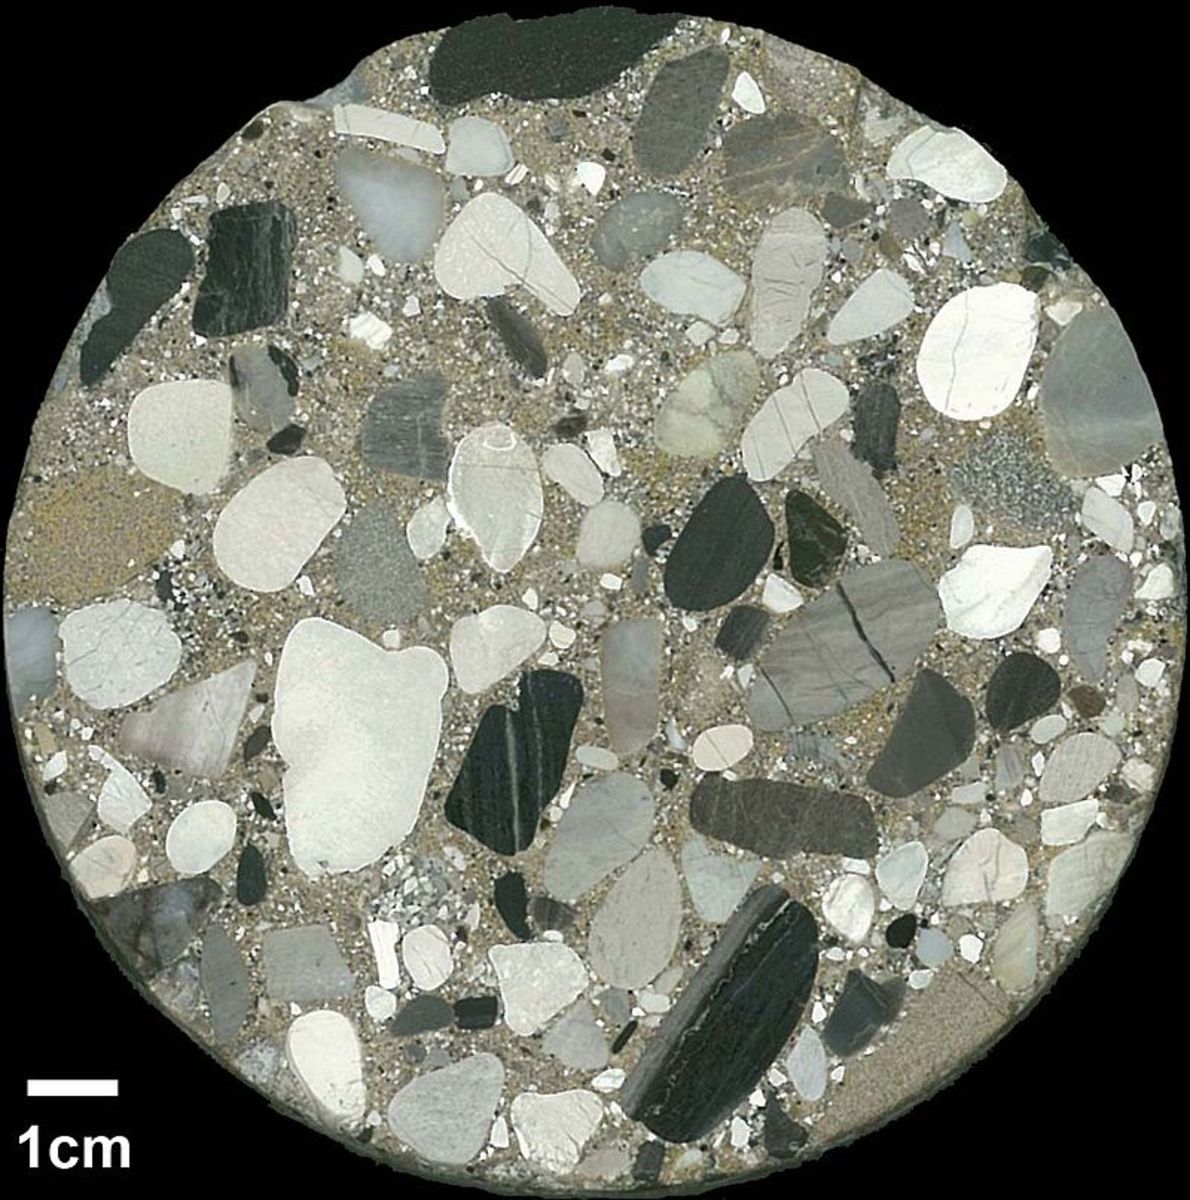 The conglomerate in this core sample has older clasts surrounded by a younger matrix of silt, sand, and clay.